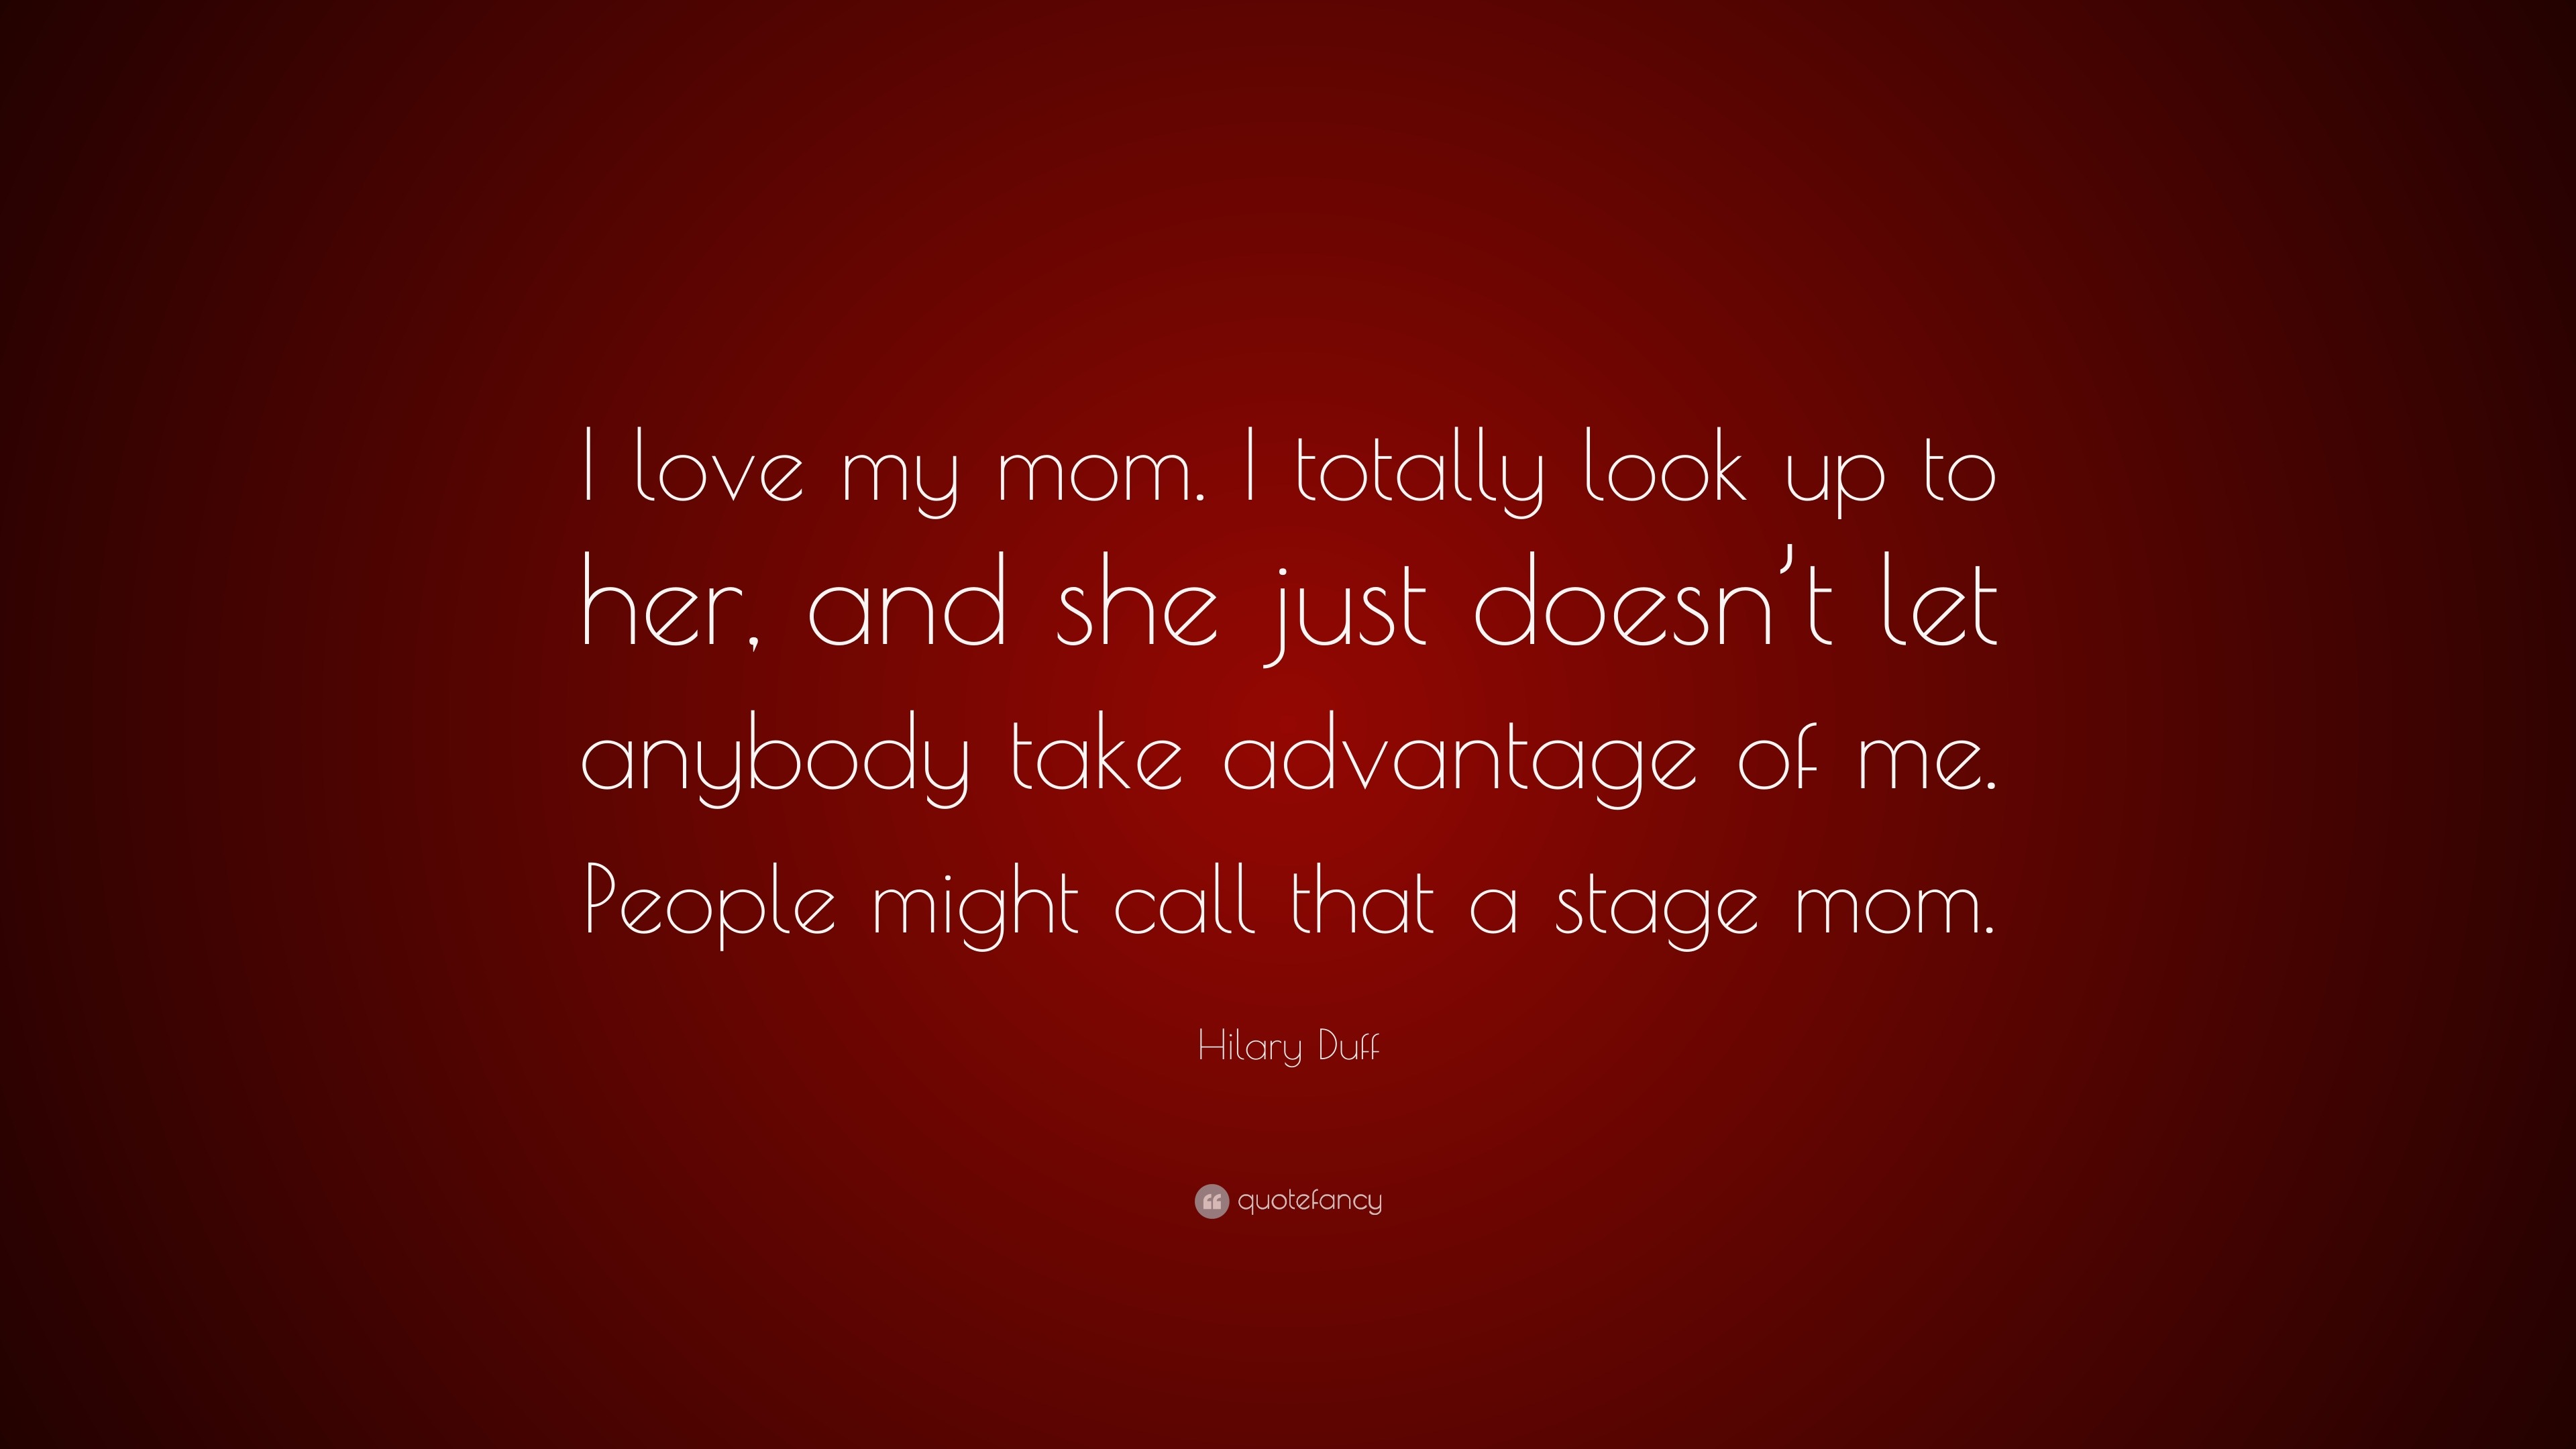 Hilary Duff Quote: “I love my mom. I totally look up to her, and she ...